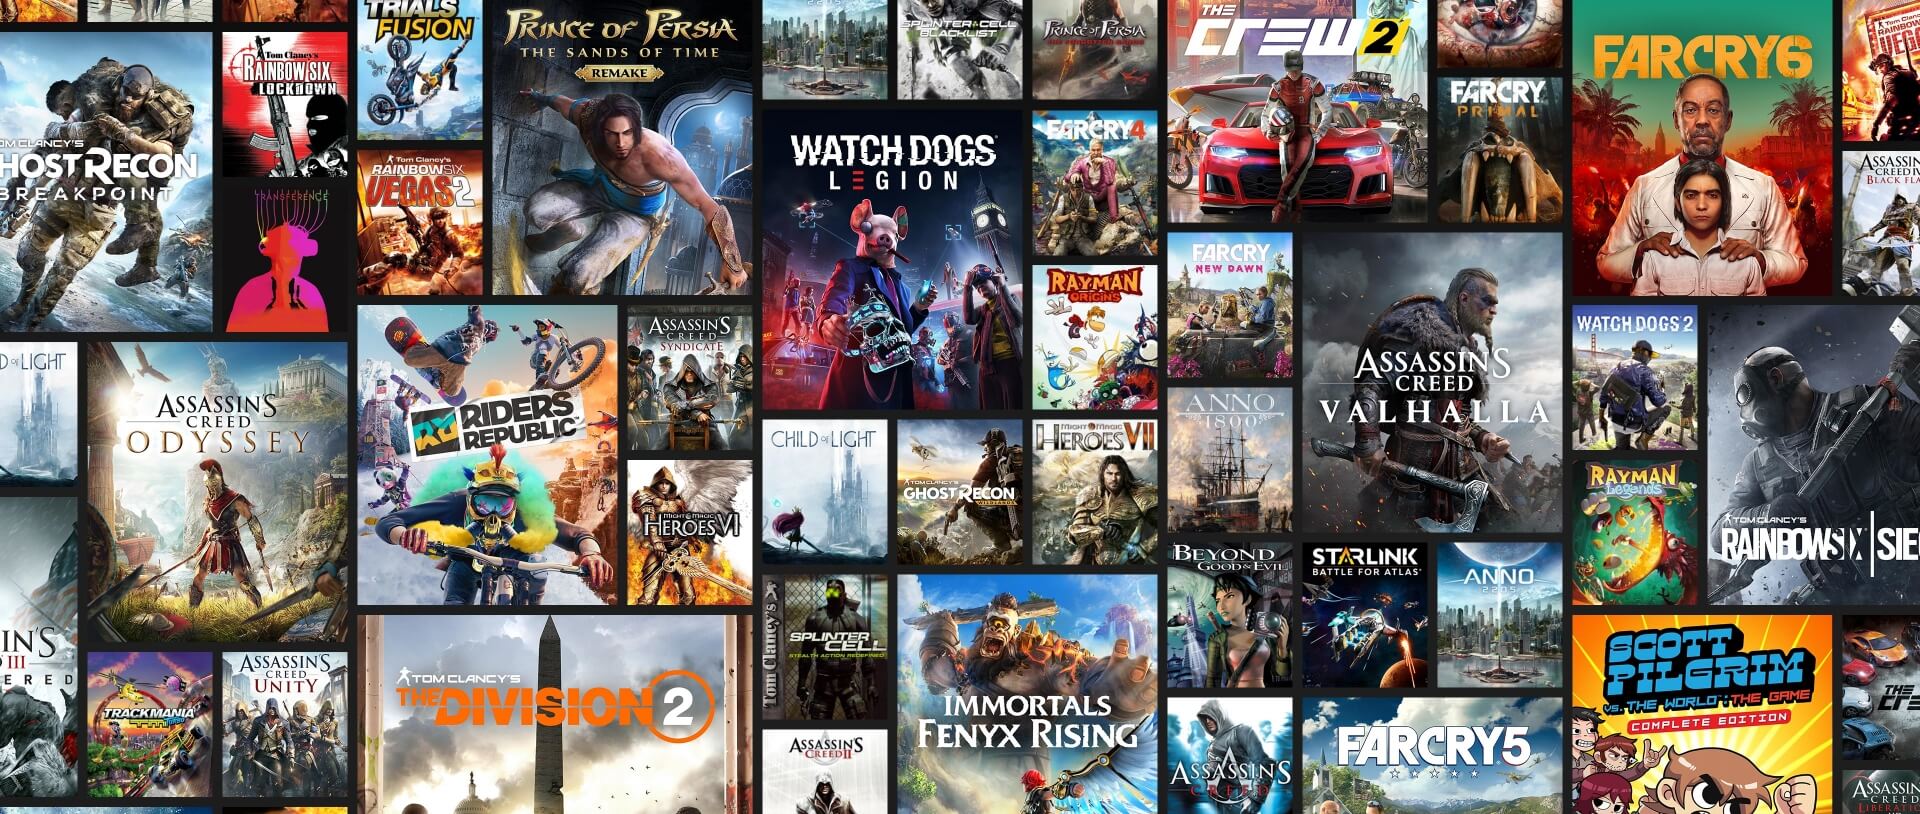 xbox game pass library pc